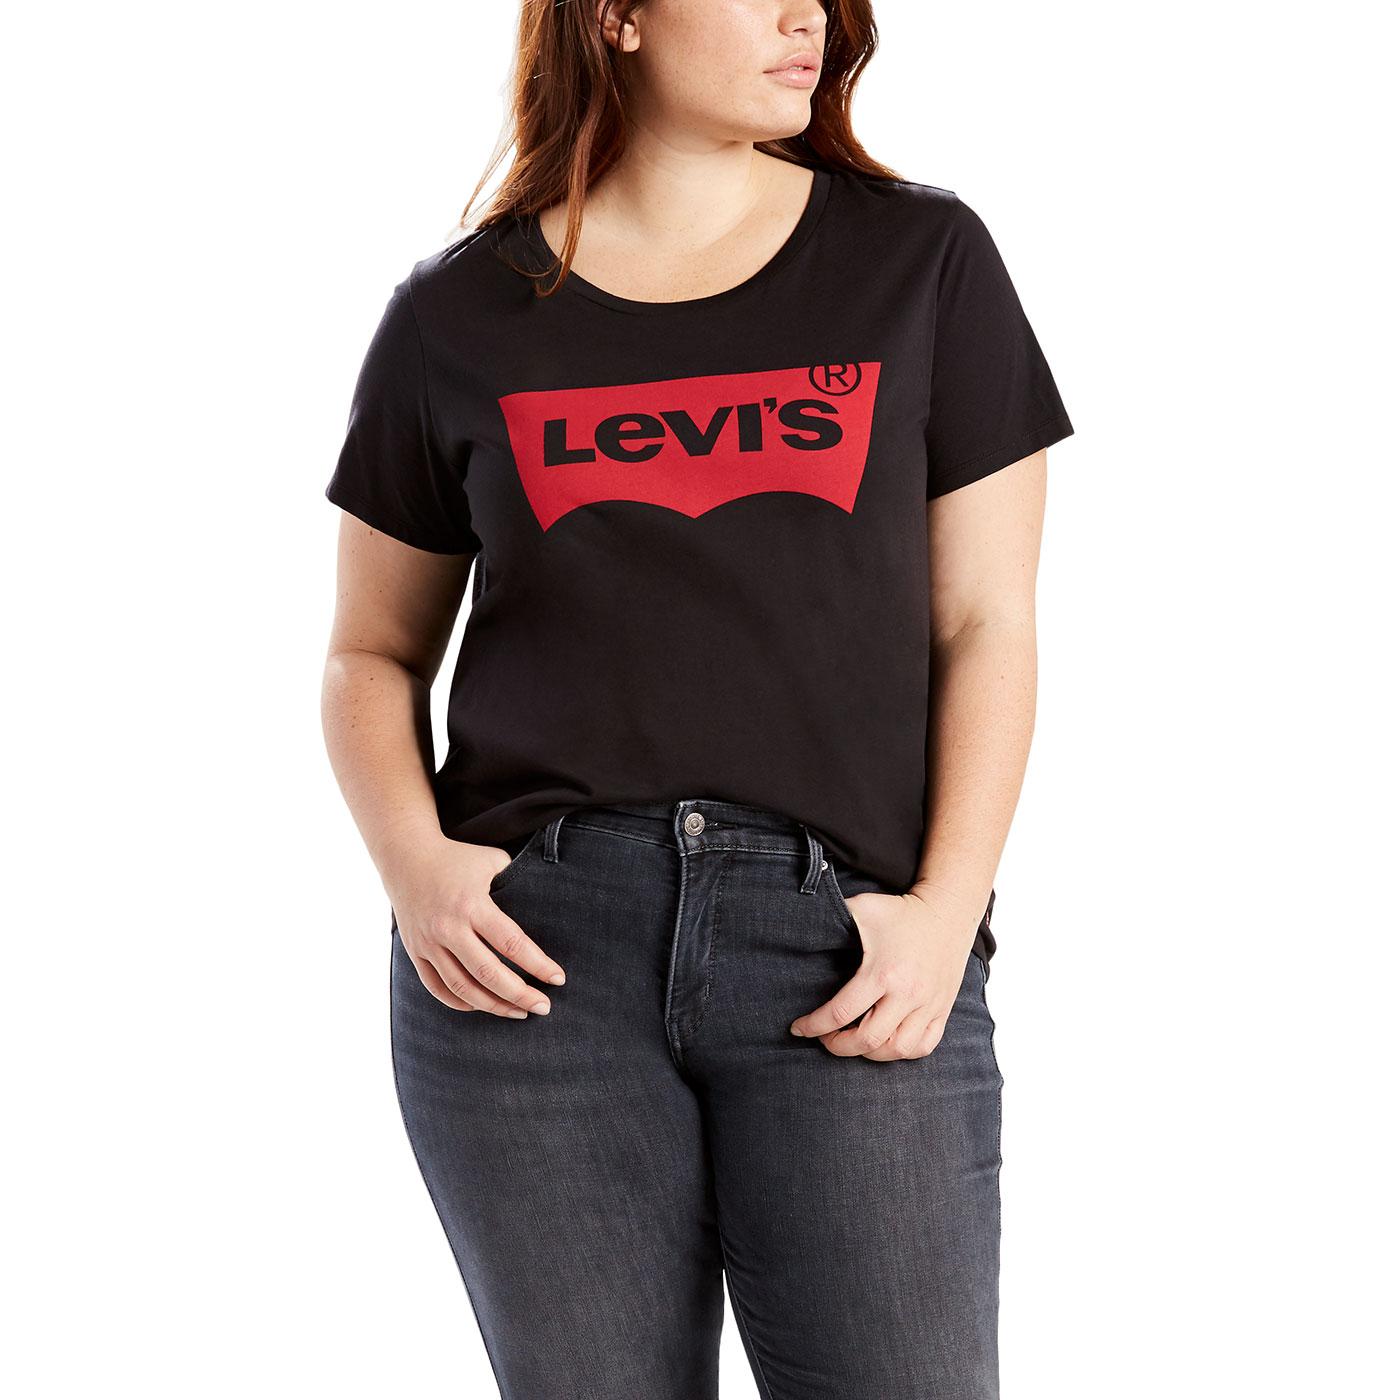 LEVI'S PL Perfect Plus Size Retro Batwing Tee in Mineral Black